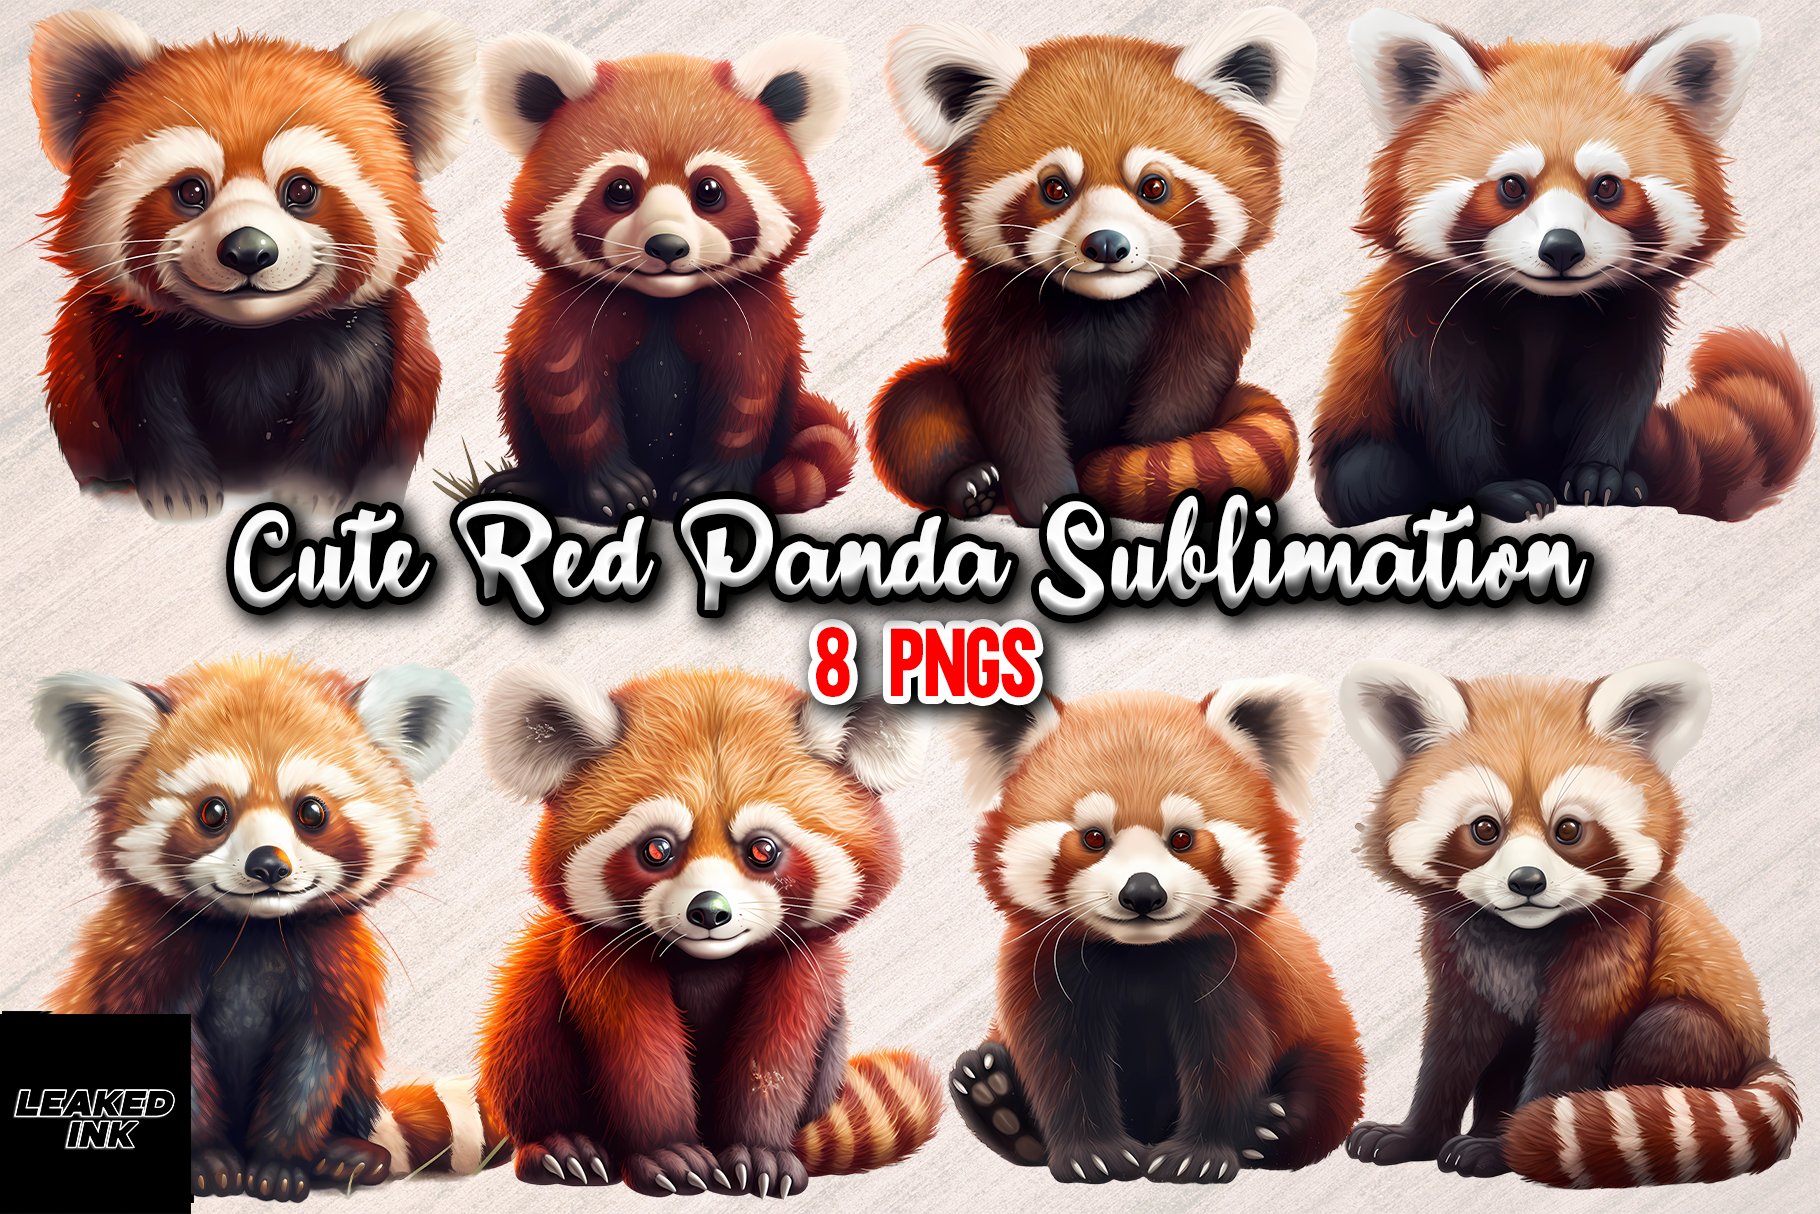 Cute Red Panda Sublimation - 8 PNGs cover image.